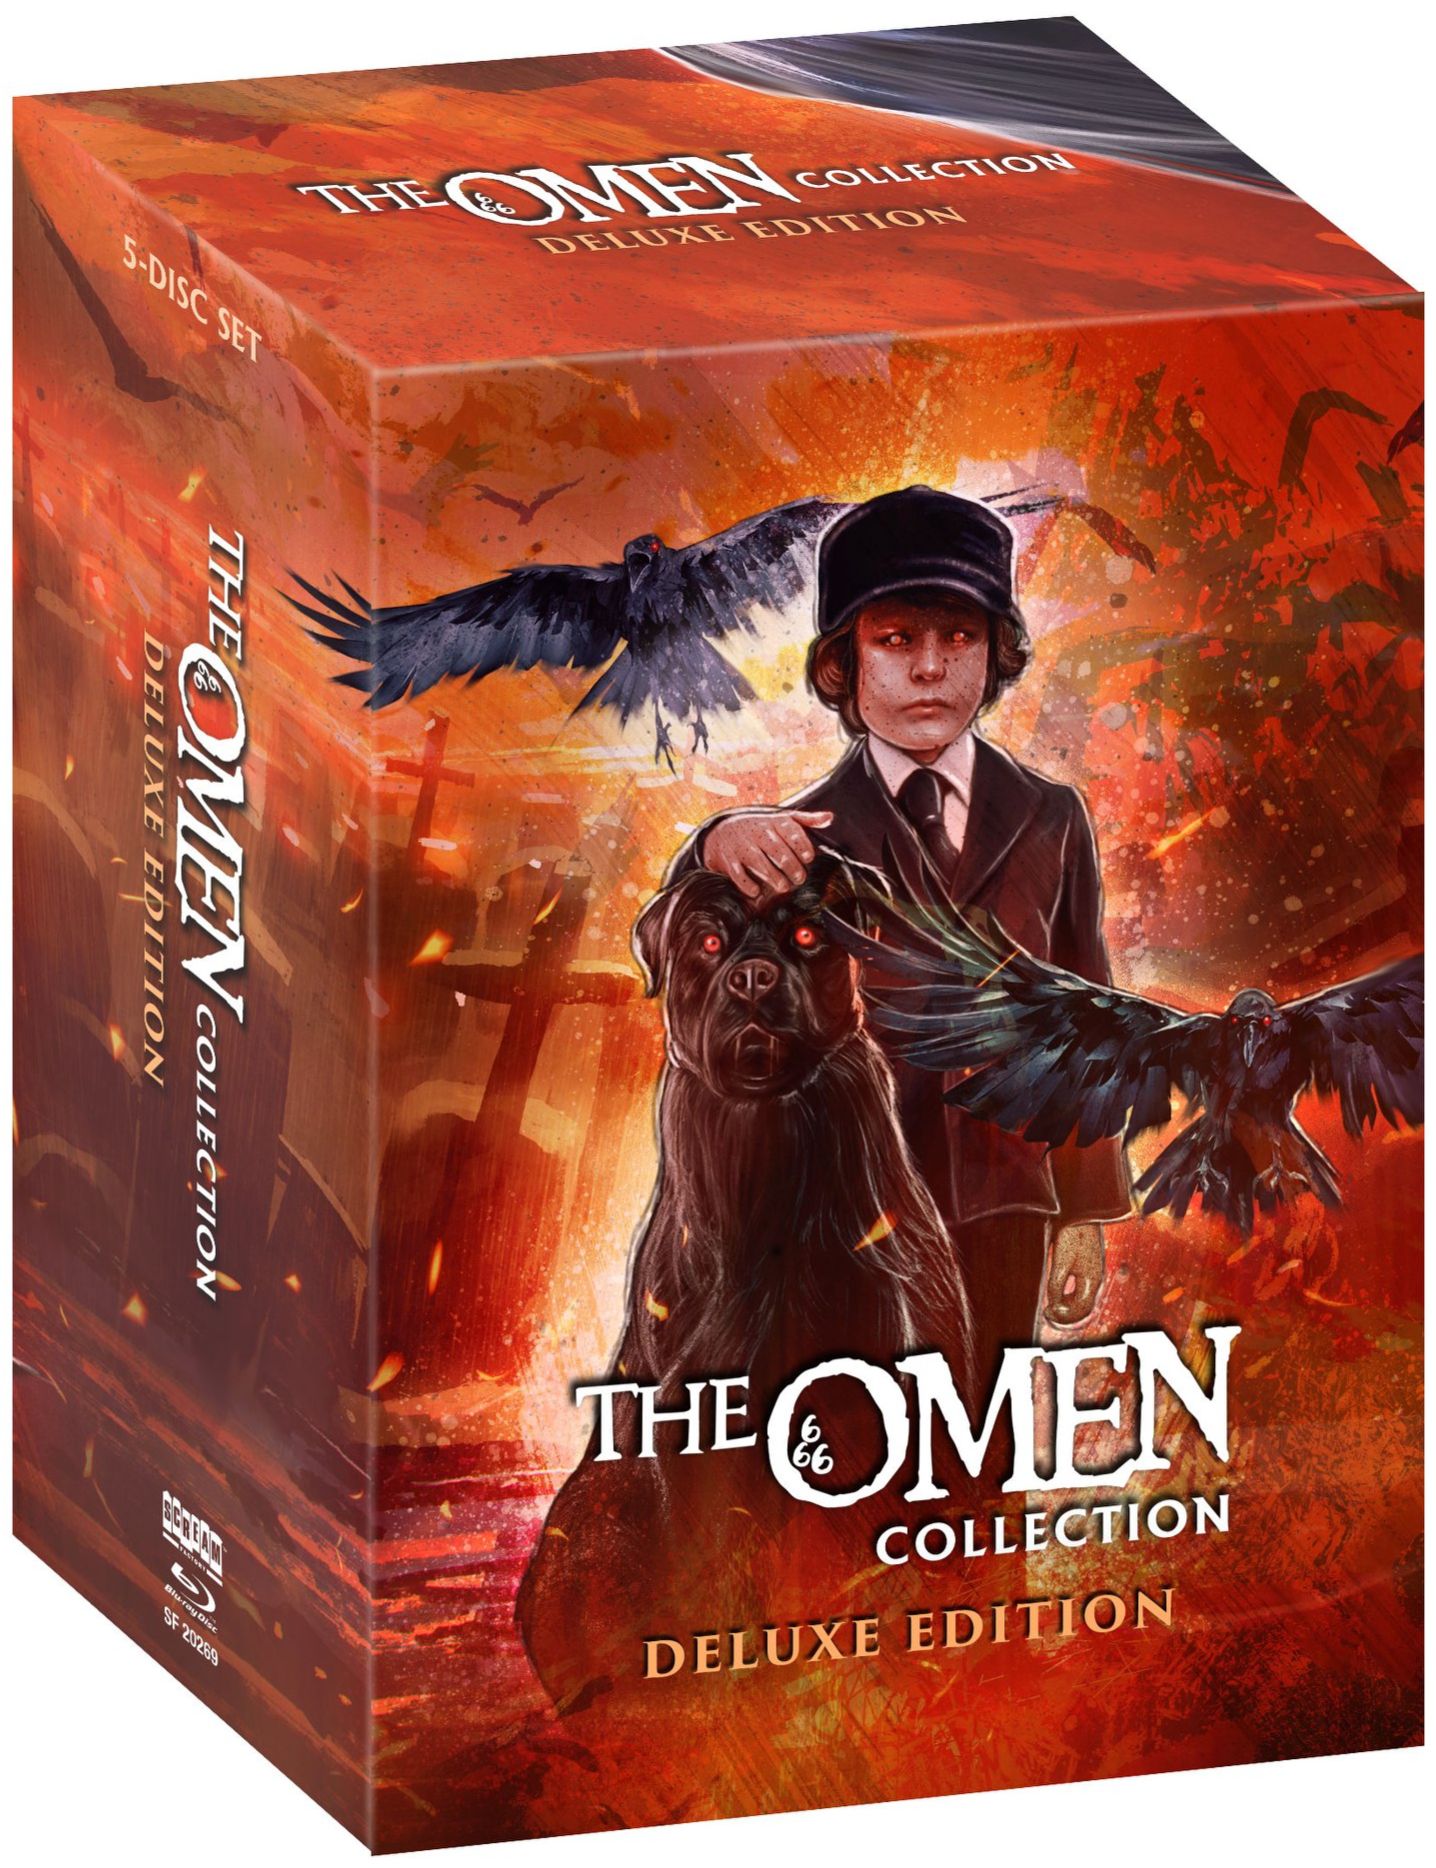 The Omen Blu-ray collection